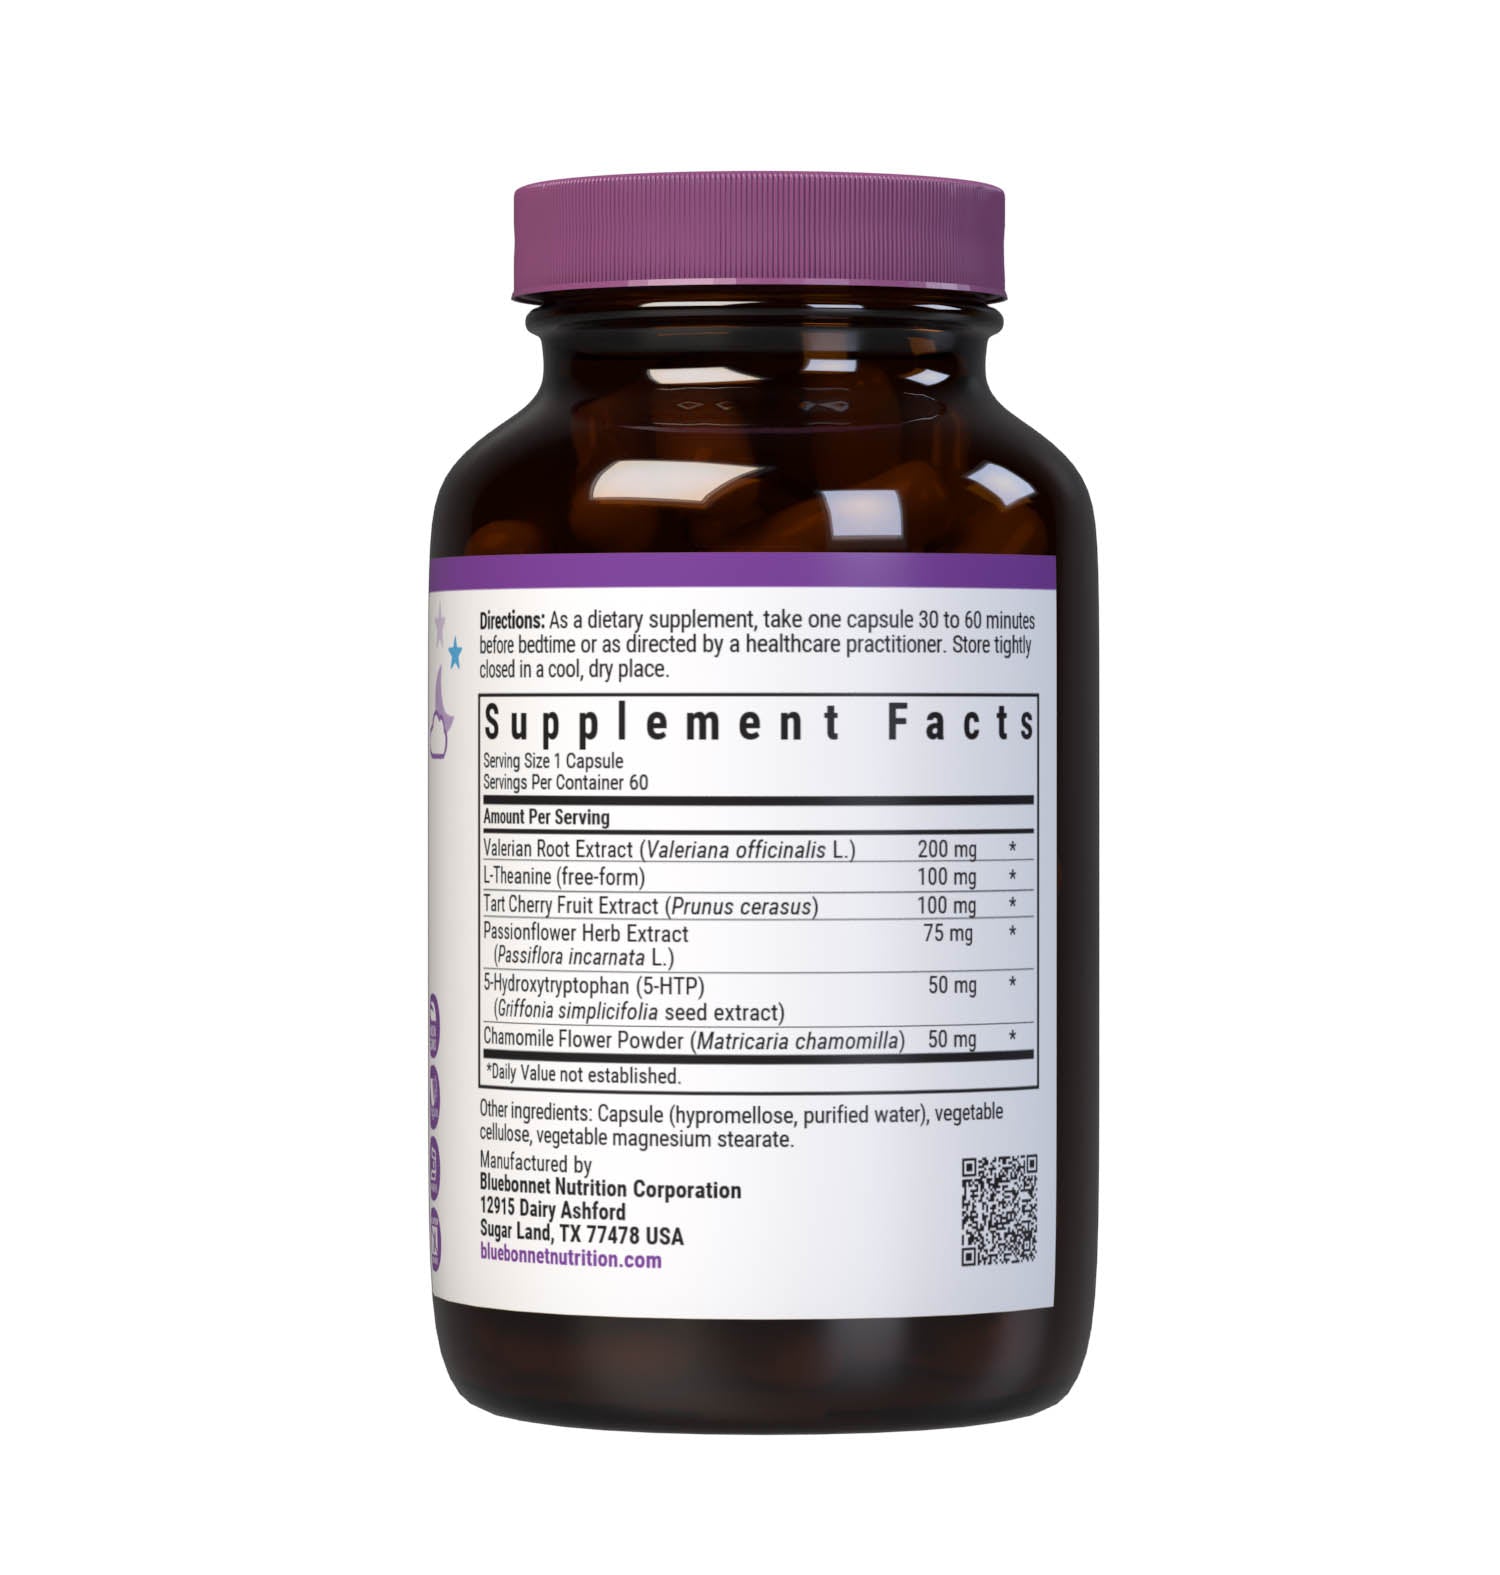 Bluebonnet’s Targeted Choice Sleep Support 60 Vegetable Capsules are specially formulated with a unique blend of whole food nutrients, amino acids and herbal extracts to help promote restful sleep for those affected by occasional sleeplessness. Supplement facts panel. #size_60 count